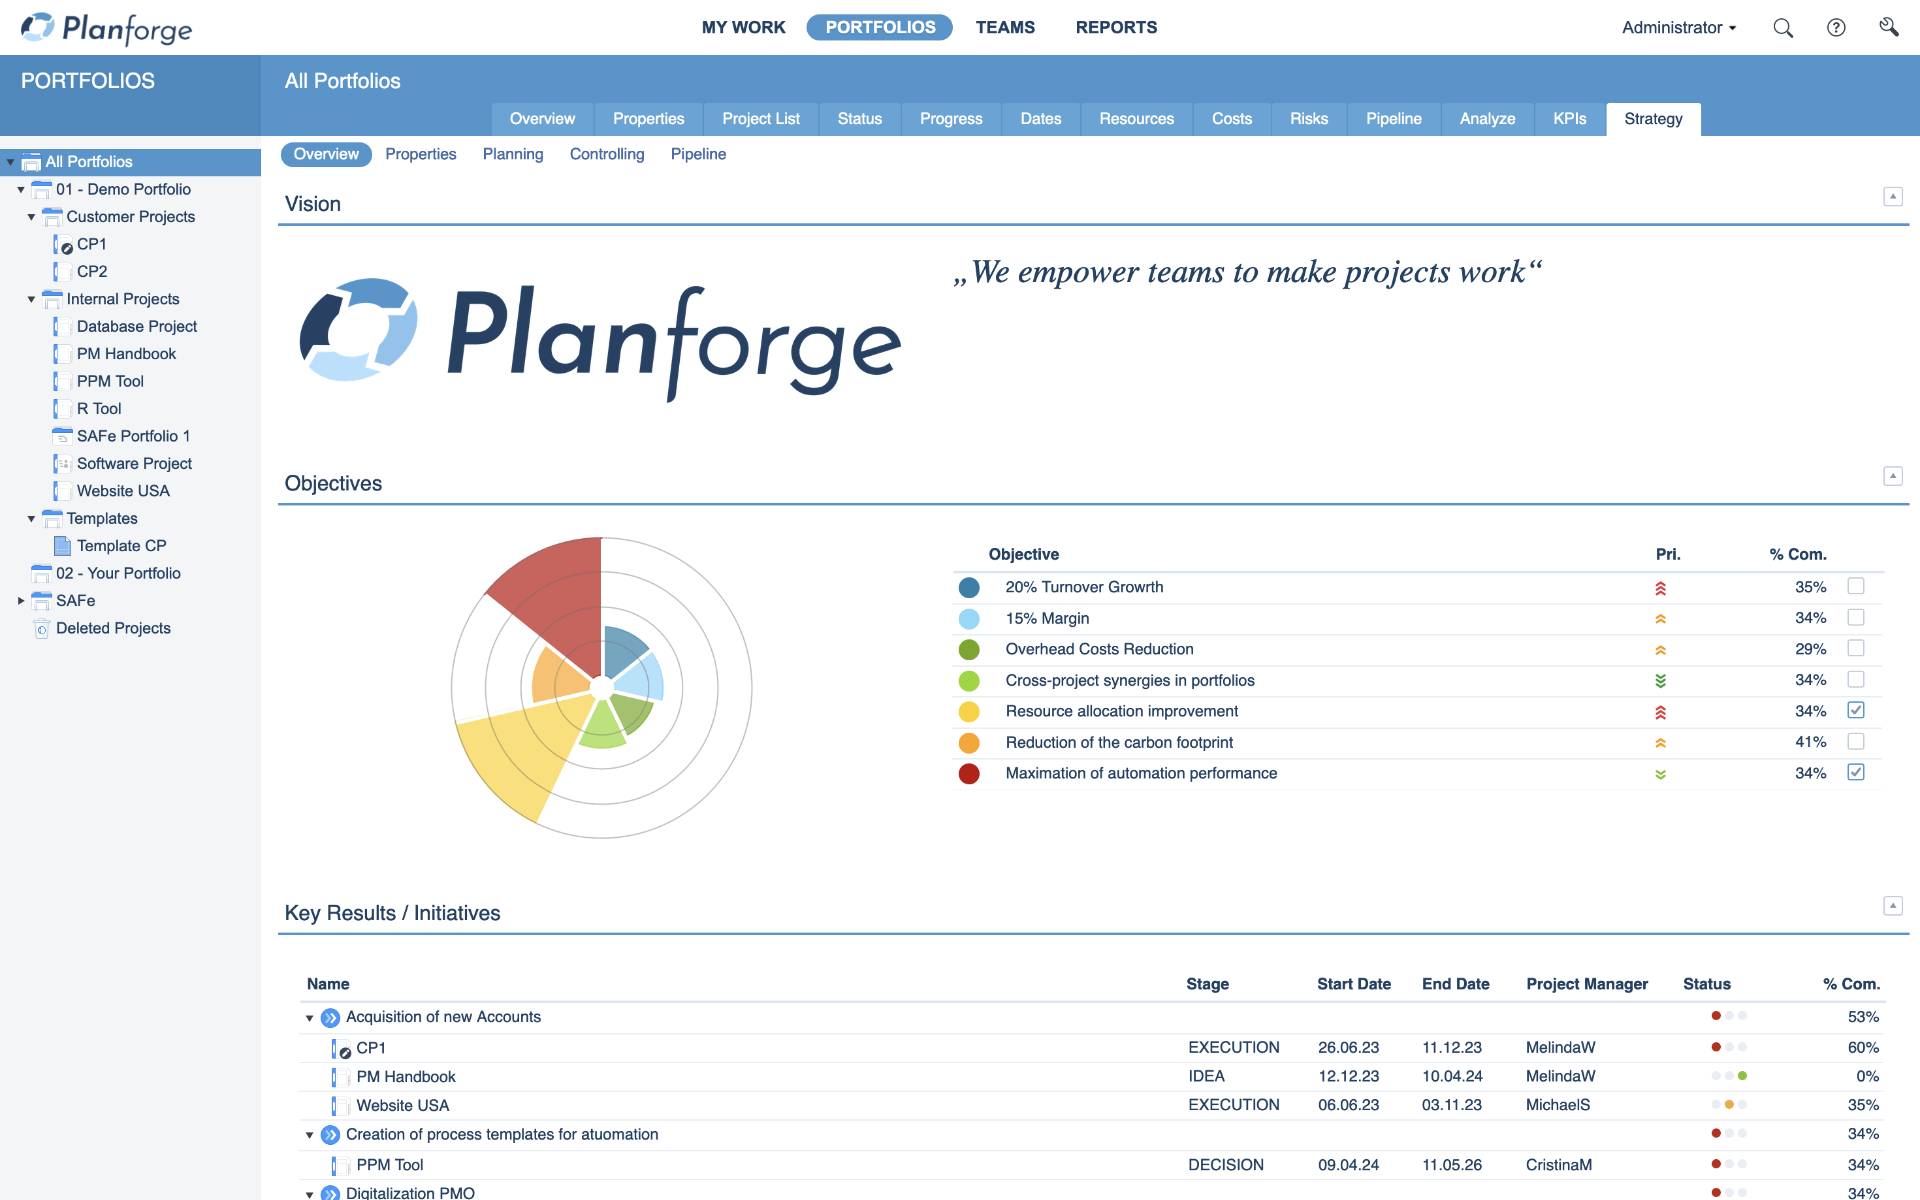 Strategic Management Strategy Dashboard Software by Planforge